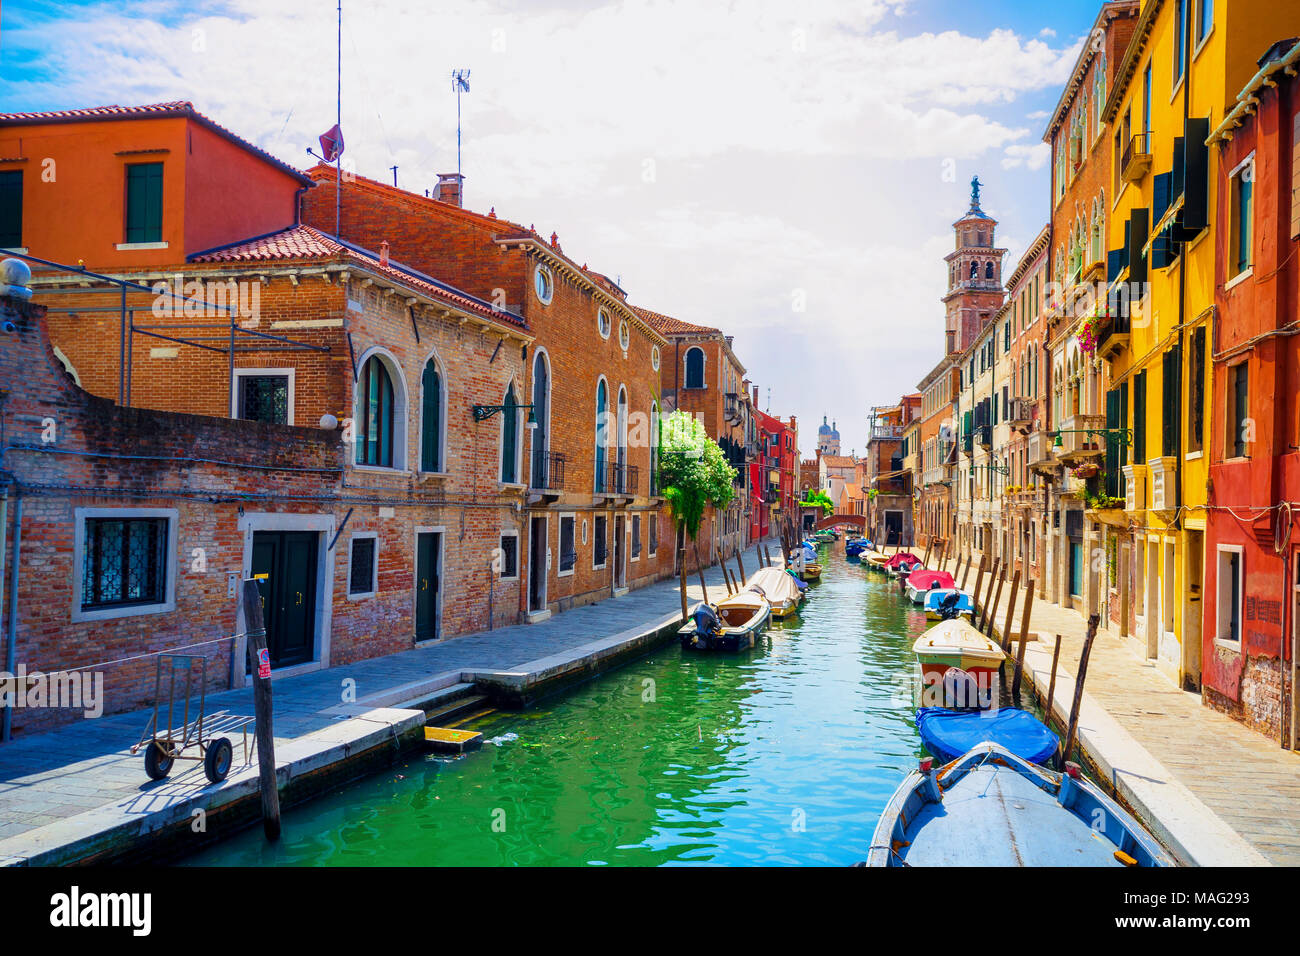 Colorful  view of a scenic canal, Venice, Italy Stock Photo